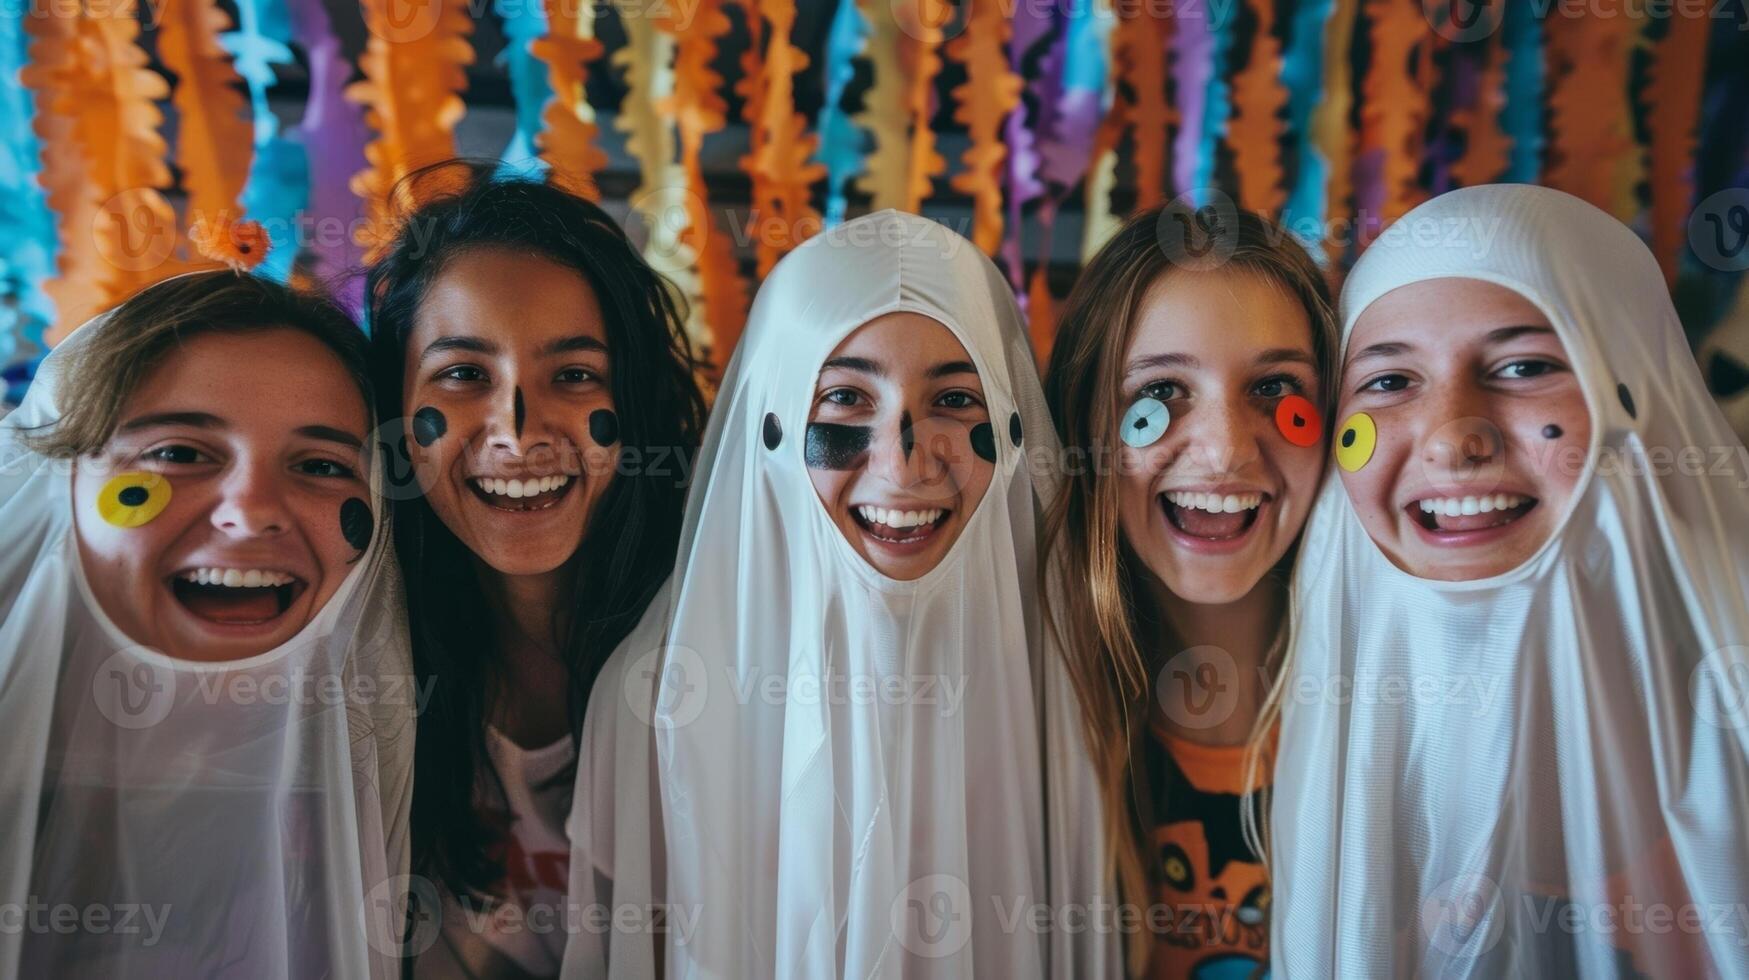 A group of friends pose for a photo in front of a Halloweenthemed photo booth wearing creative costumes such as a ghost sheet with googly eyes